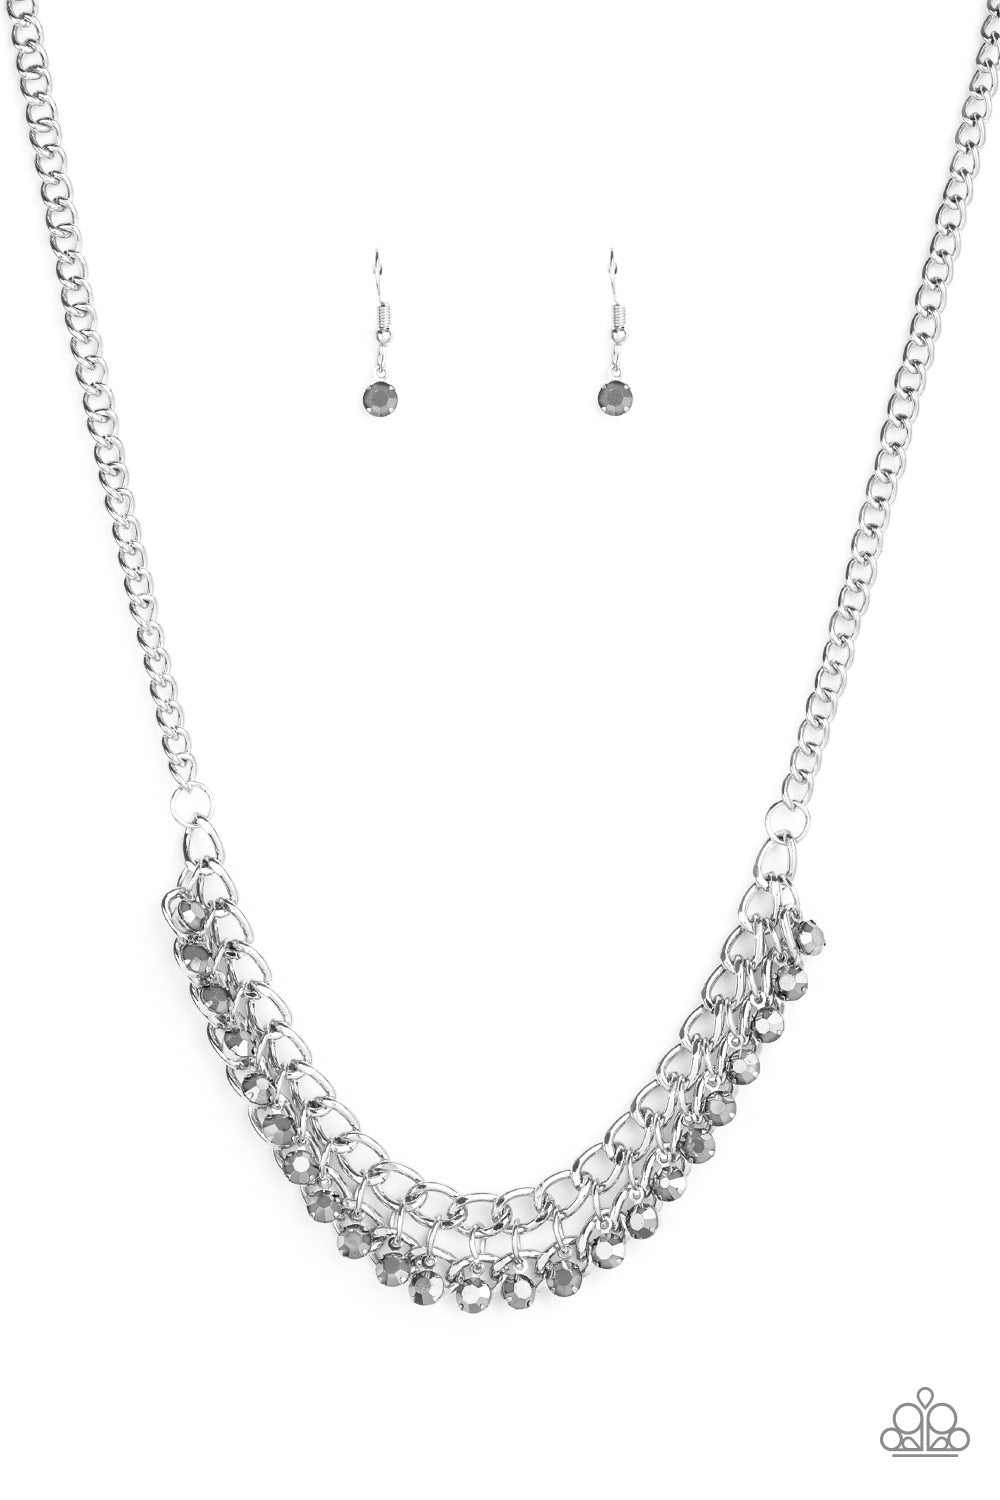 A fringe of glittery hematite rhinestones swings from the bottom of a bold silver chain below the collar for a fierce look. Features an adjustable clasp closure.